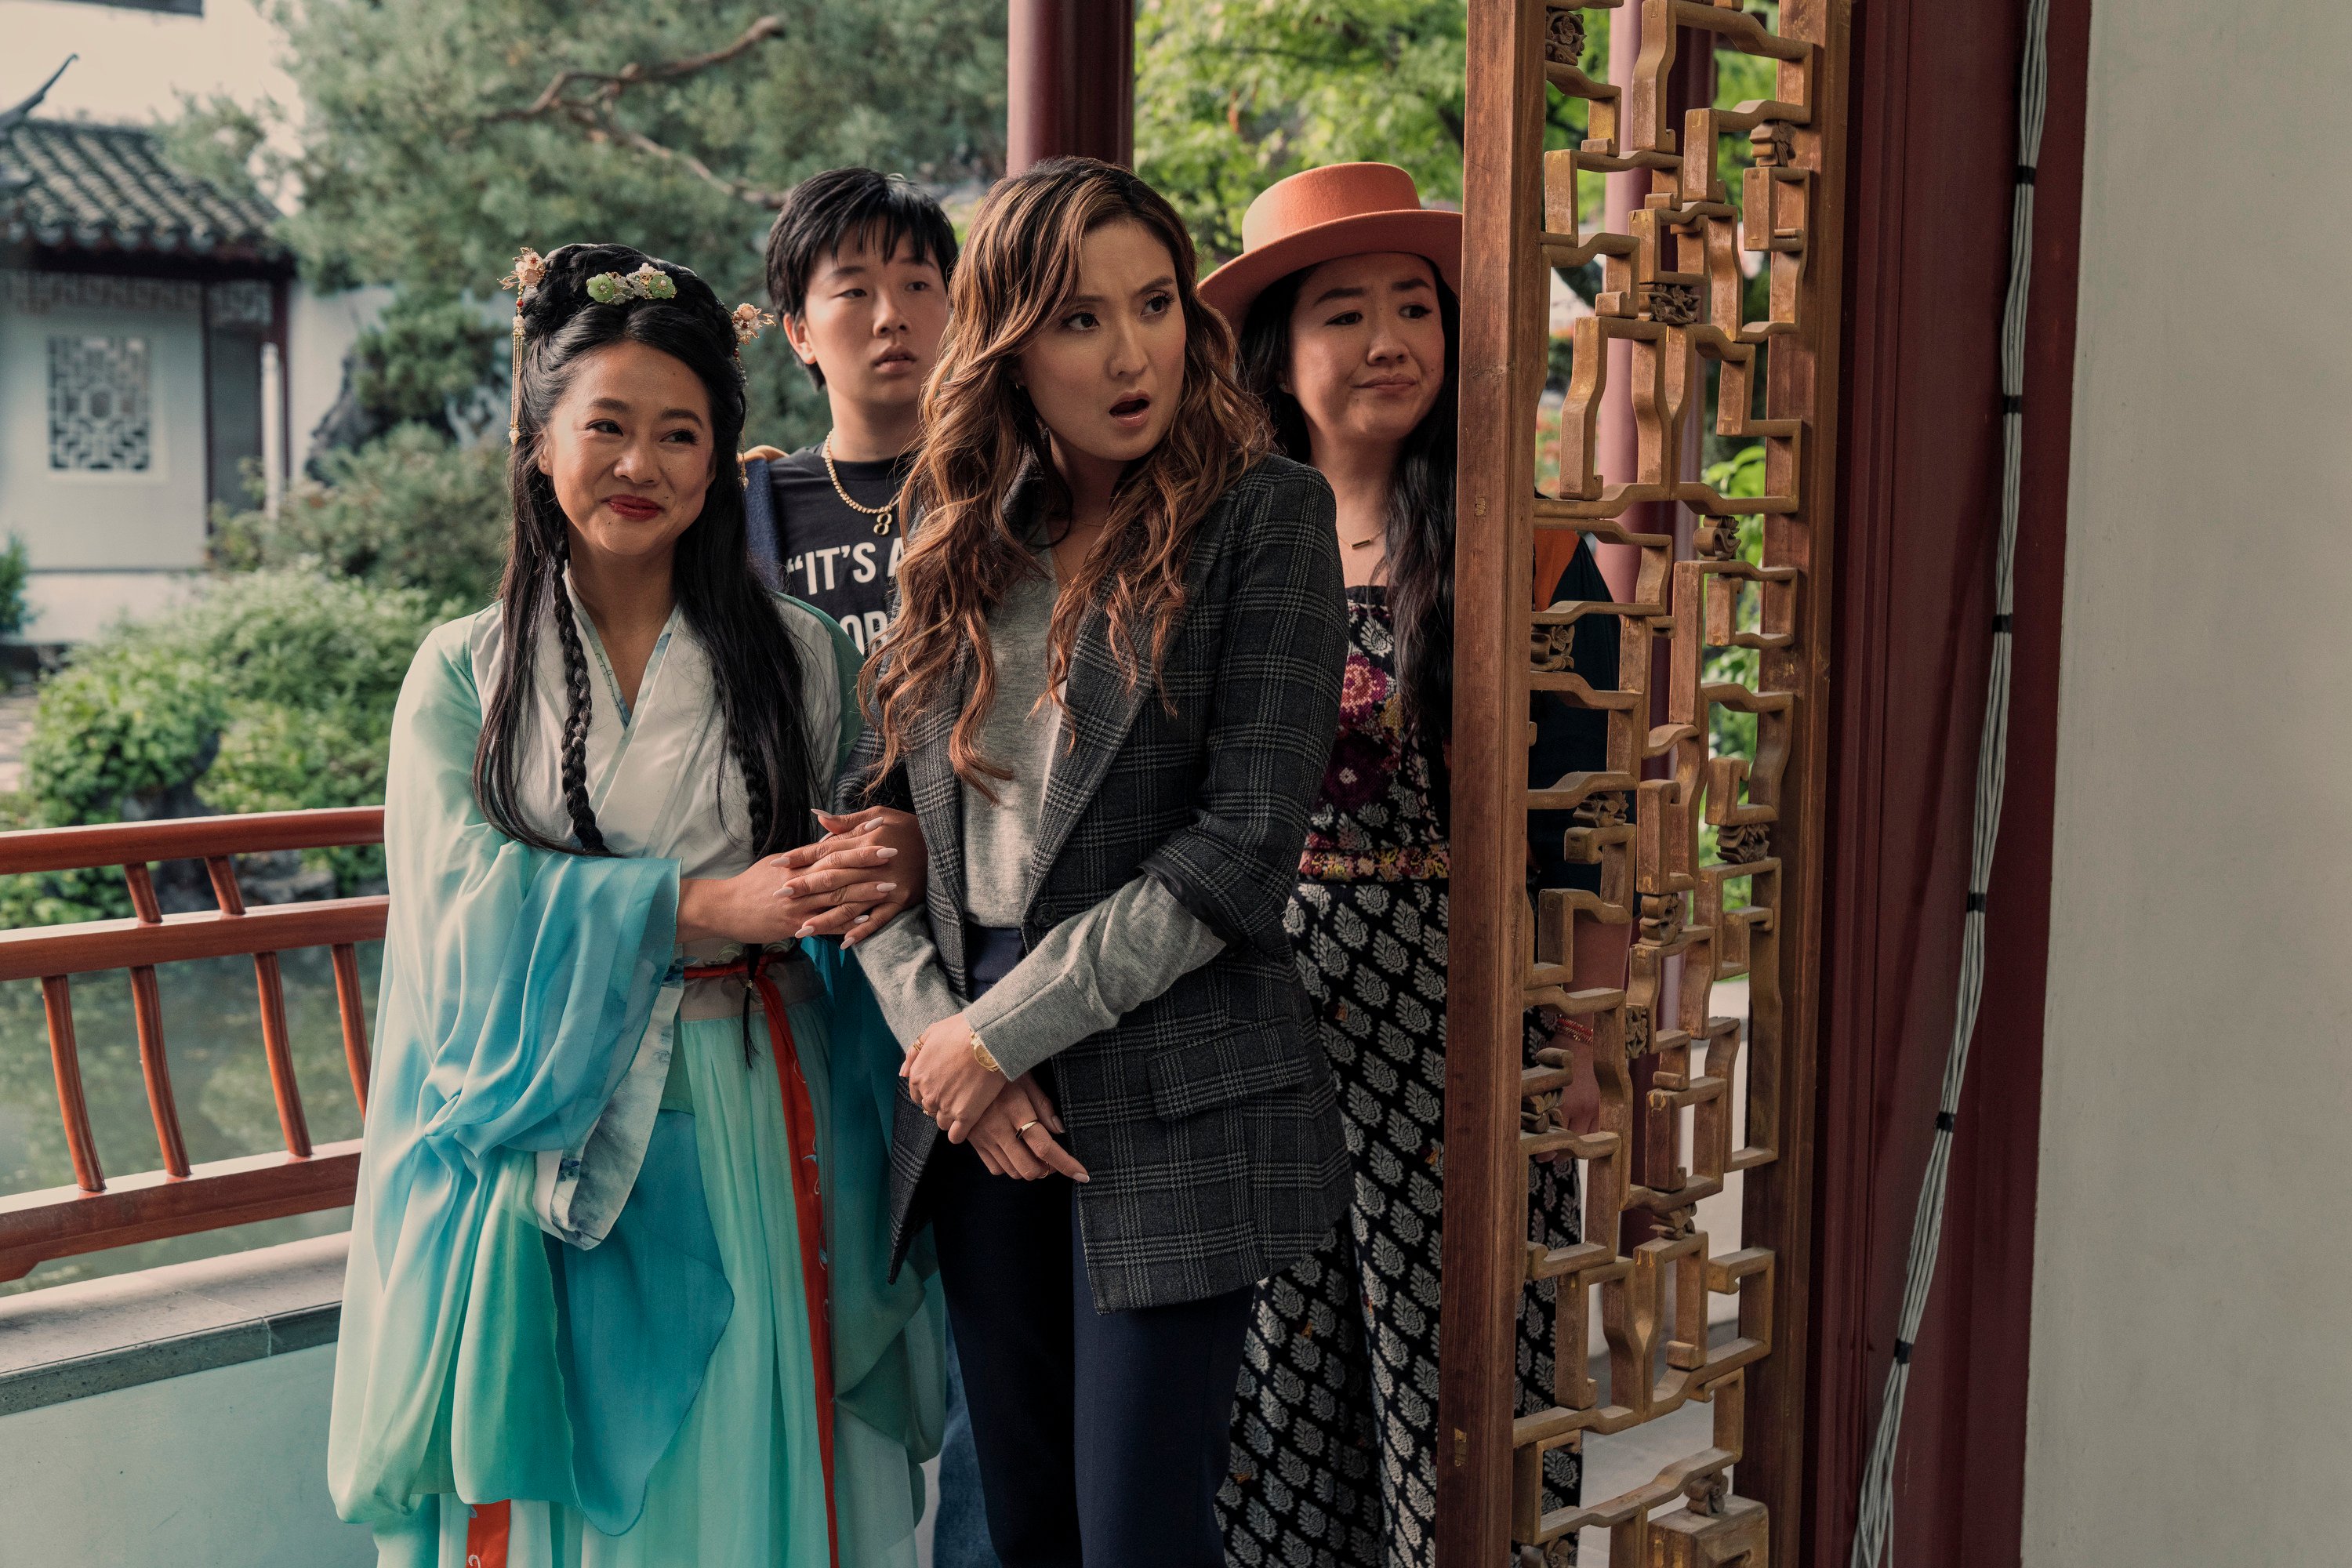 (From left) Stephanie Hsu, Sabrina Wu, Ashley Park and Sherry Cola in a still from “Joy Ride”, a new comedy movie directed by Crazy Rich Asians co-writer Adele Lim. Photo: Ed Araquel / Lionsgate